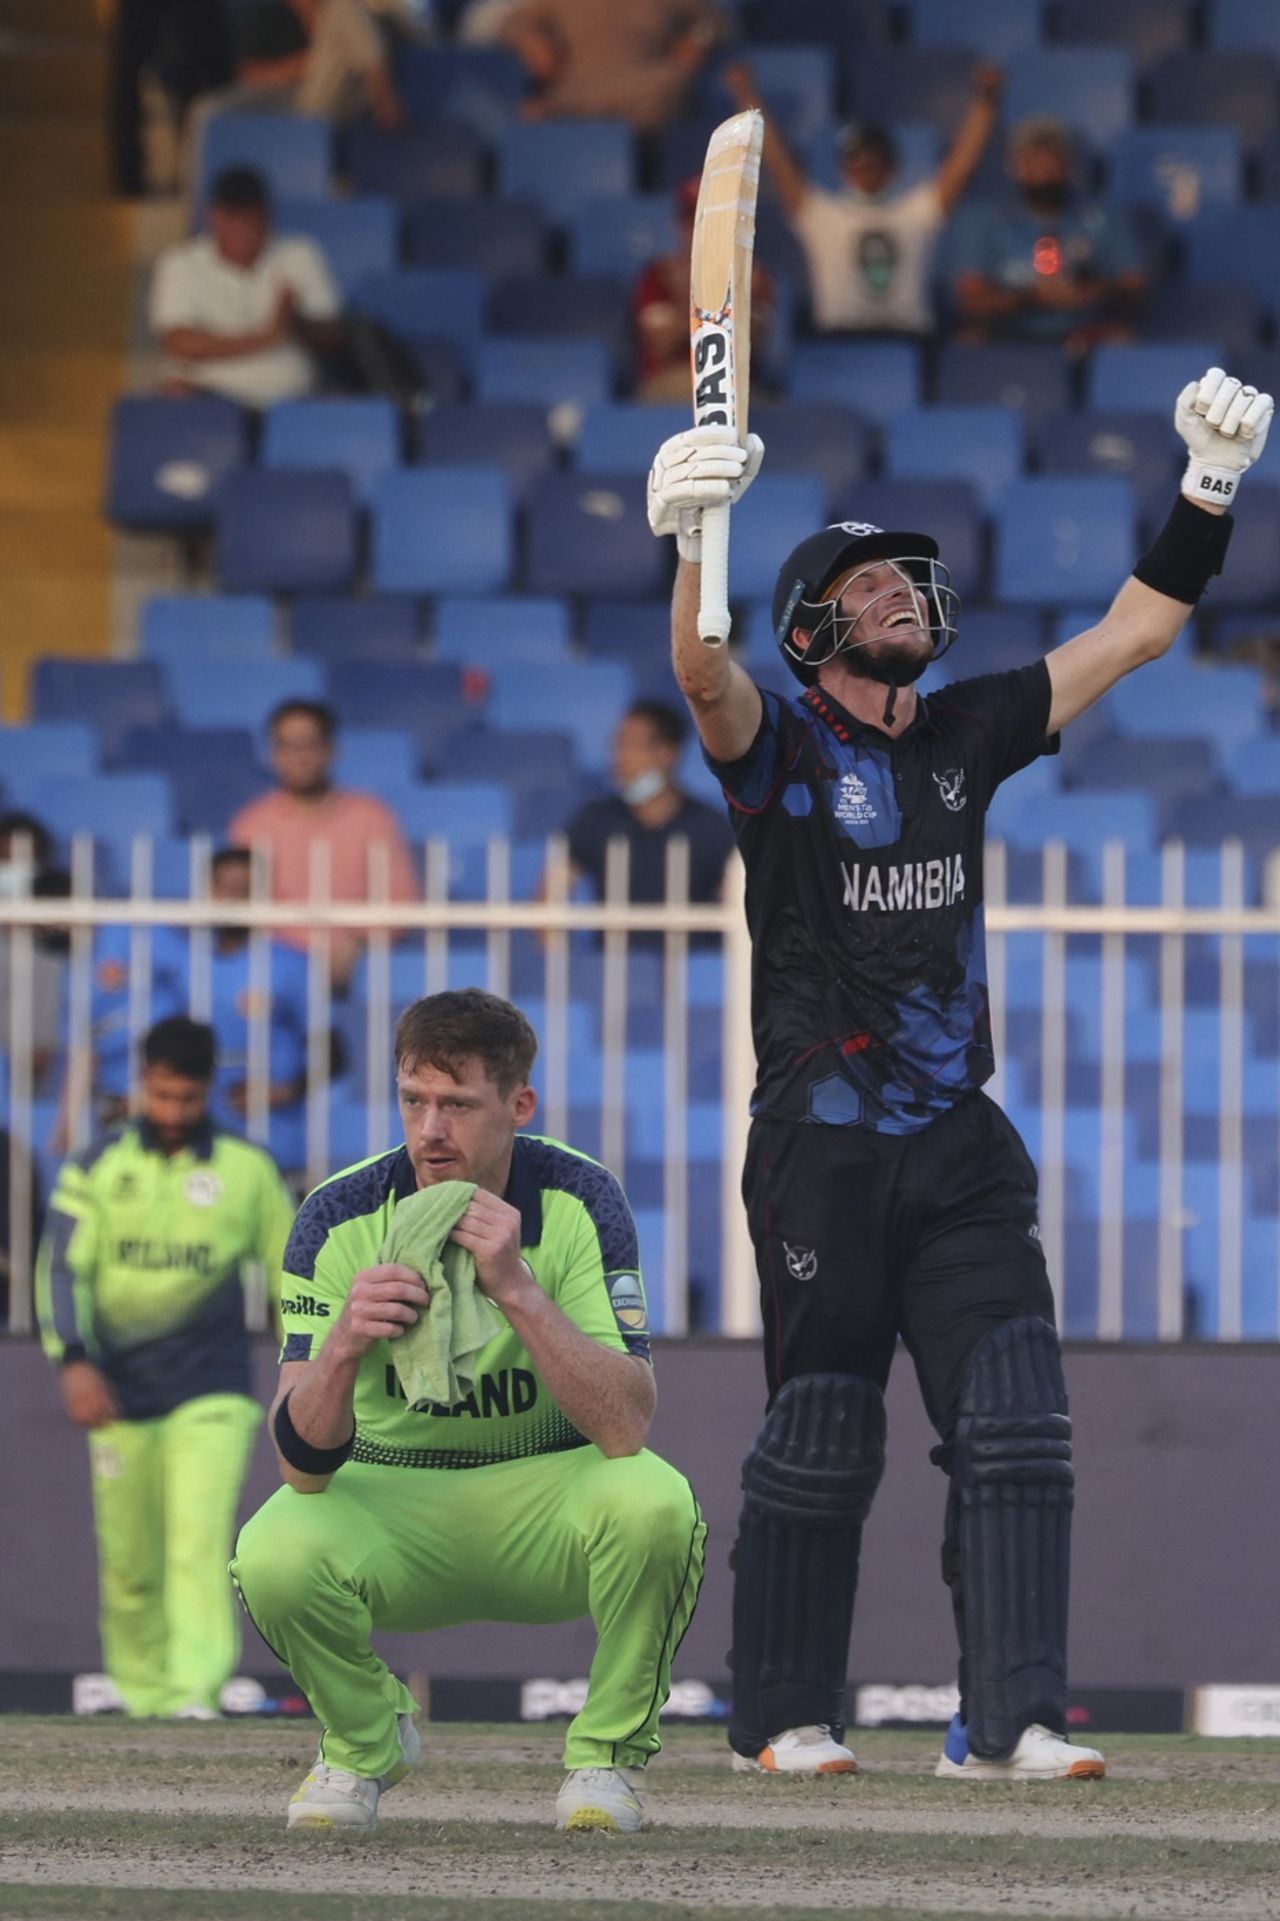 Gerhard Erasmus is elated after Namibia's win while a disappointed Craig Young looks on, Ireland vs Namibia, T20 World Cup, Sharjah, October 22, 2021